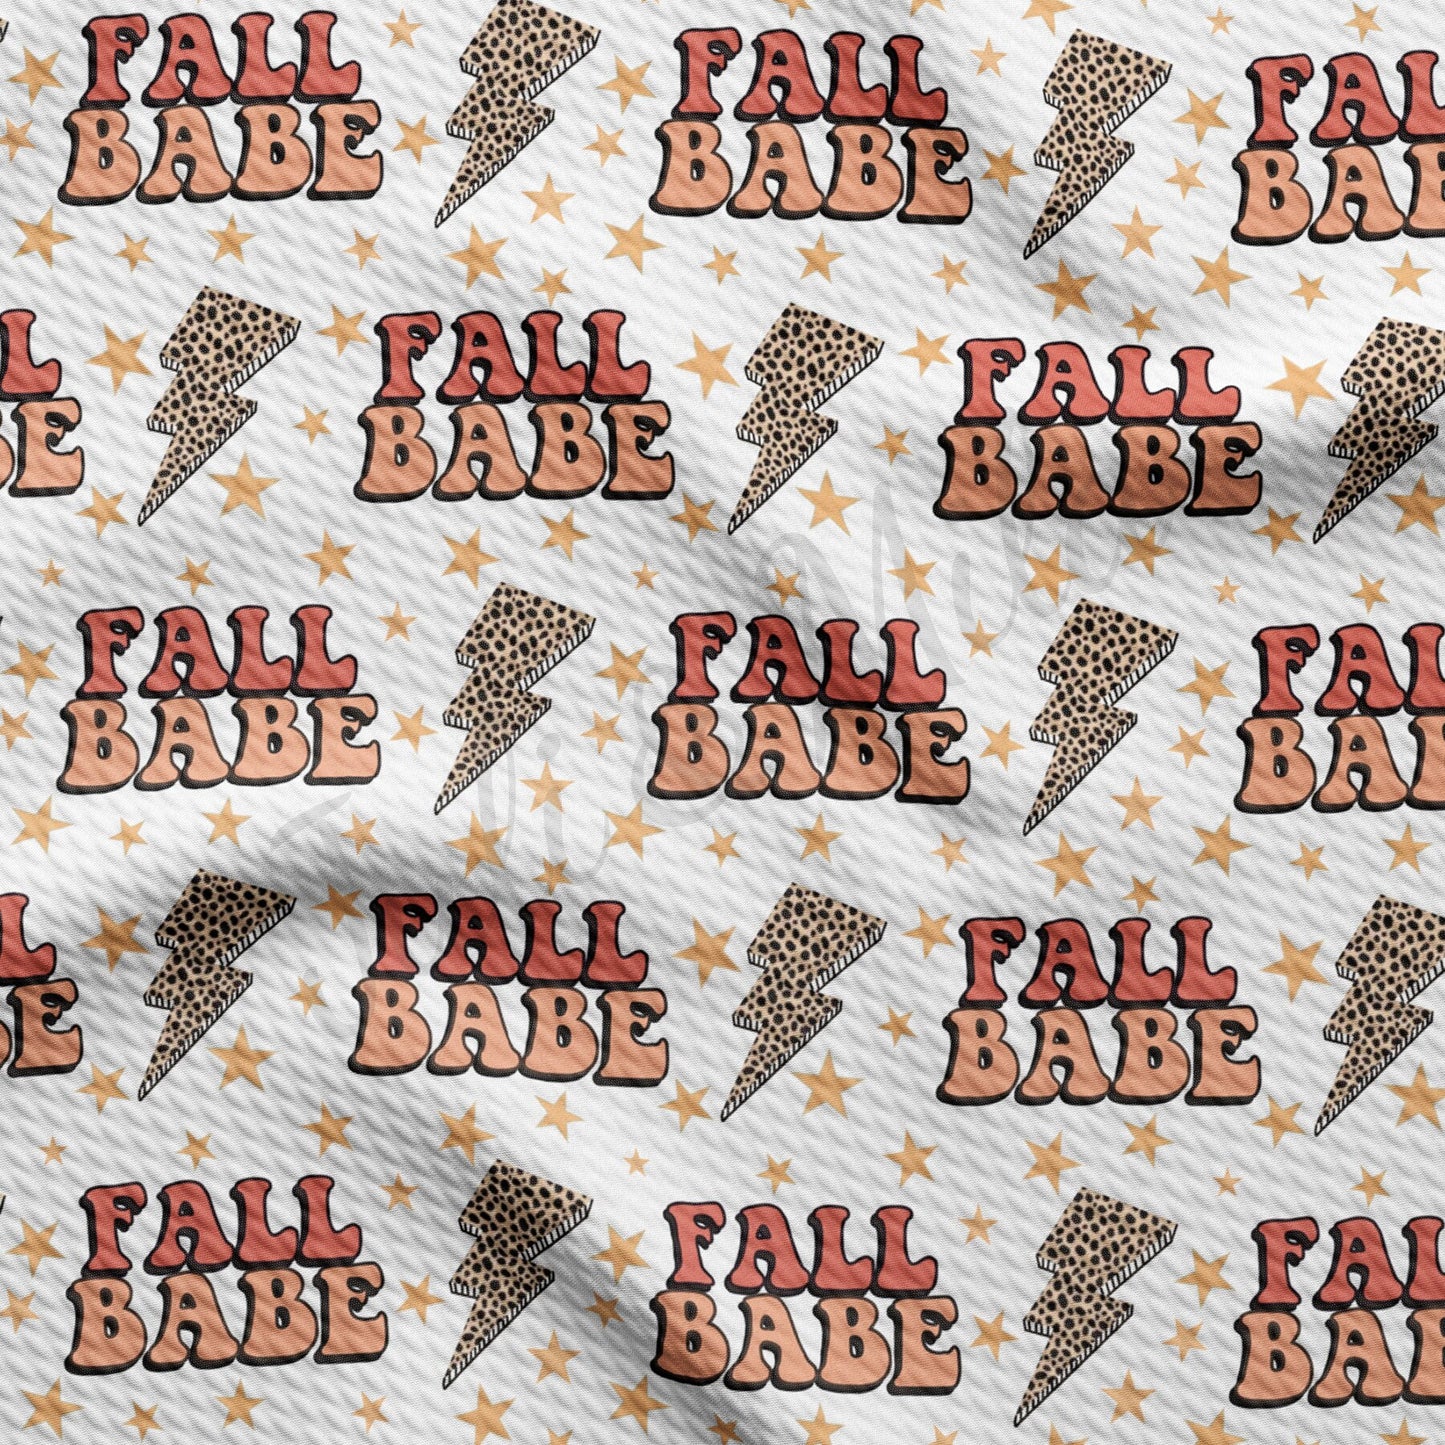 Fall Babe Bullet Textured Fabric  AA1434